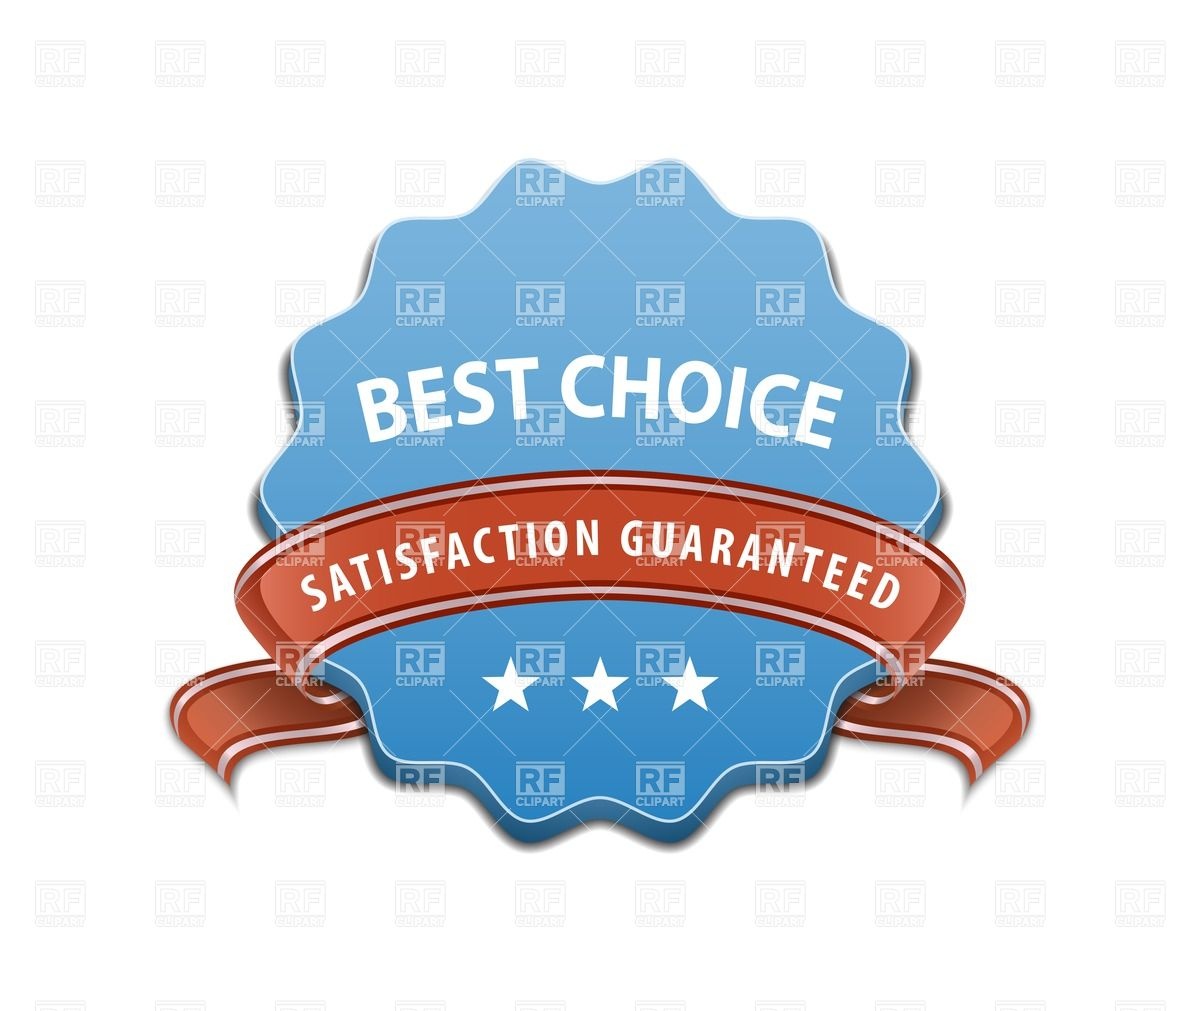 Best Choice And Satisfaction Guaranteed Label 26934 Design Elements    